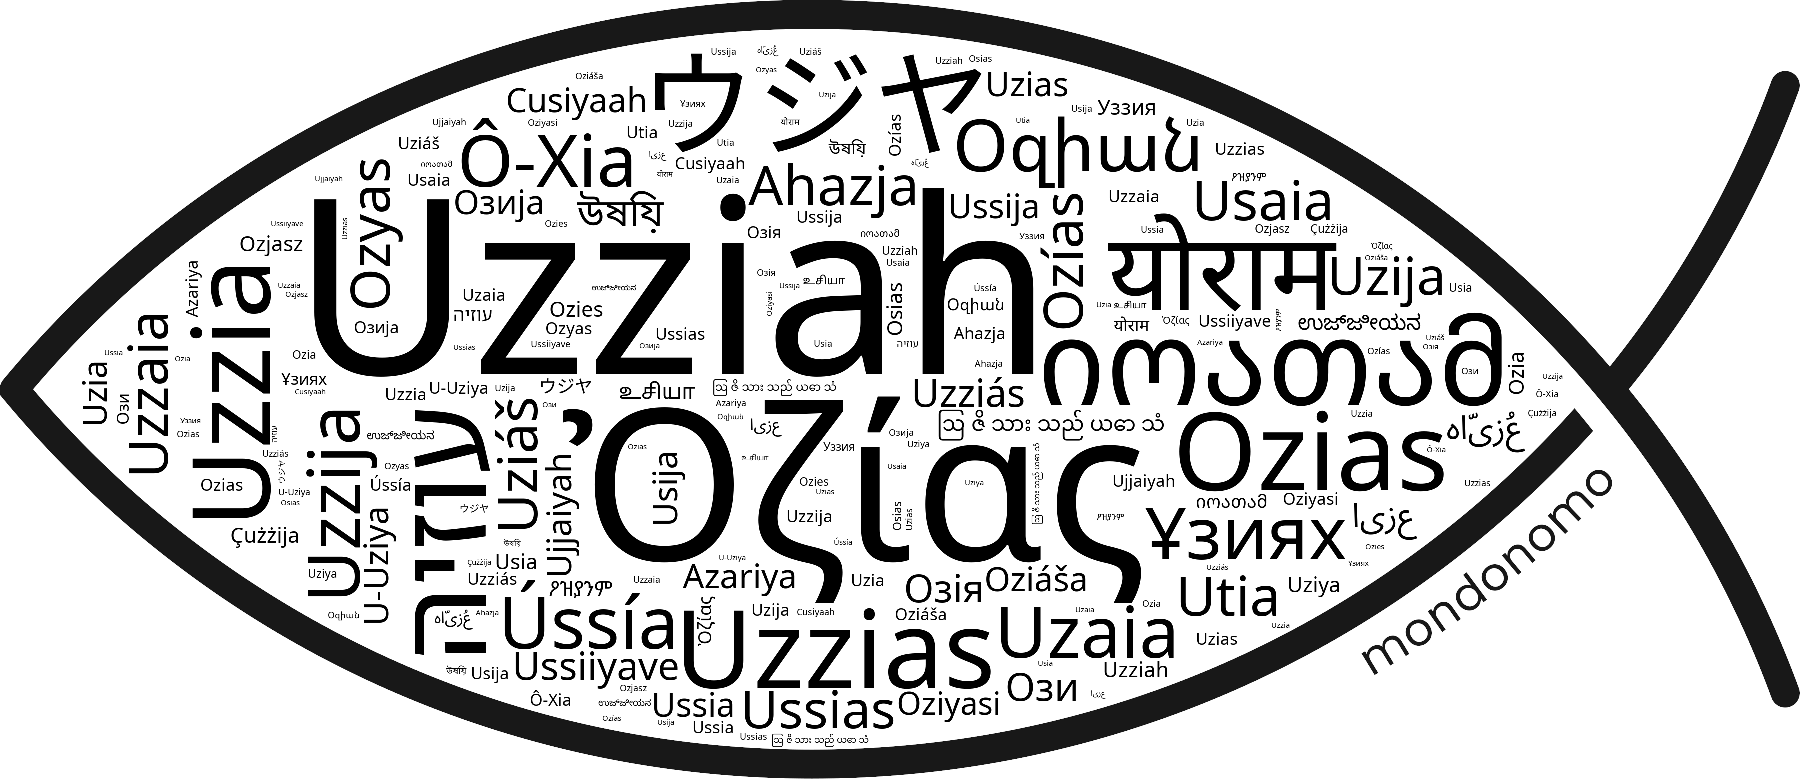 Name Uzziah in the world's Bibles